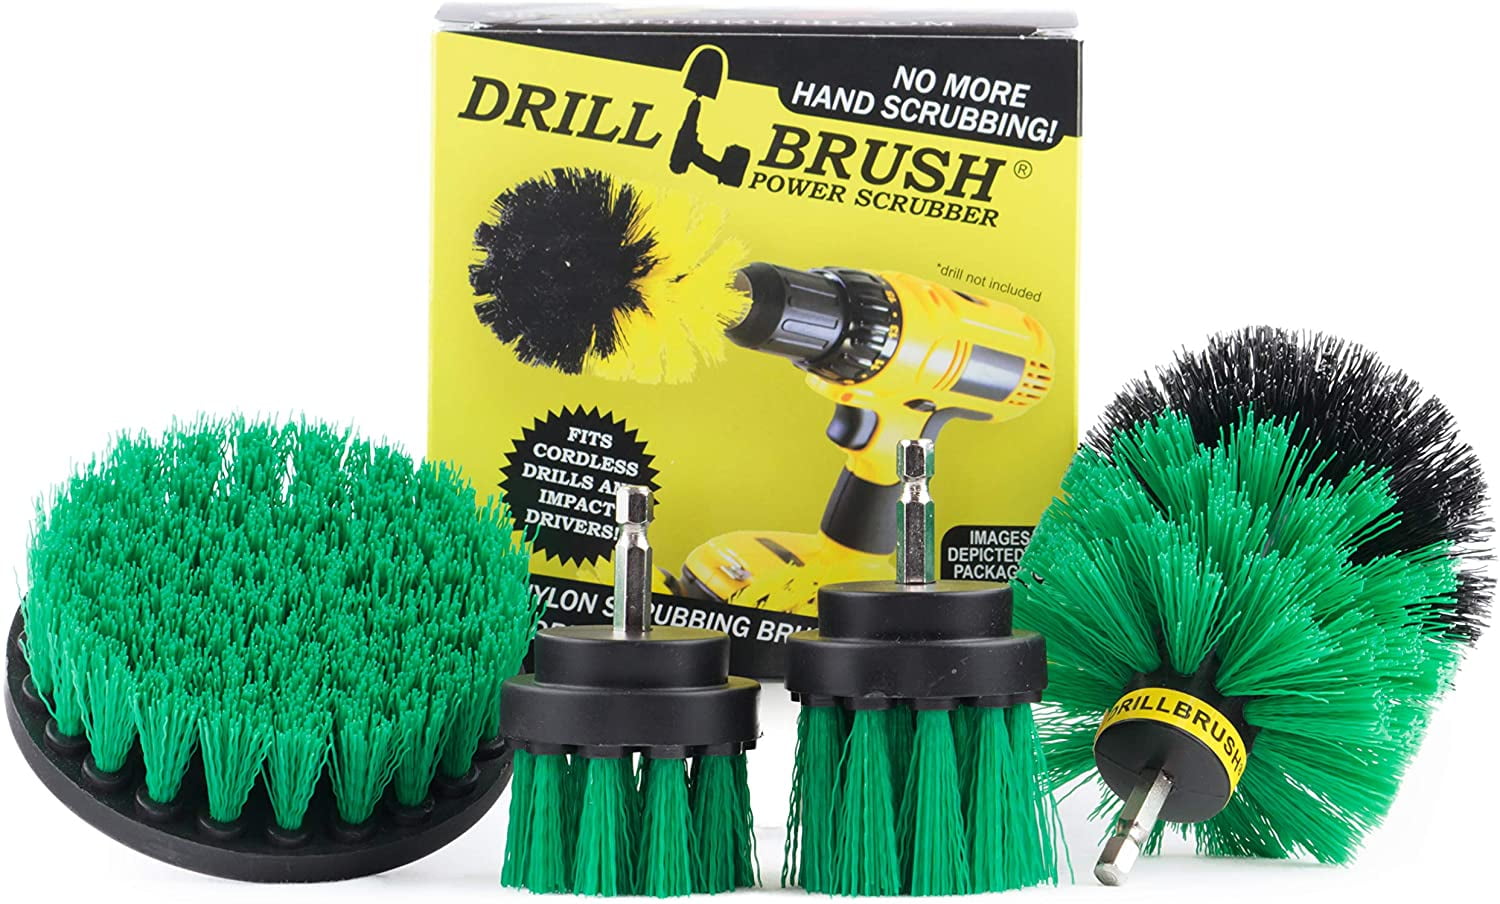 Drillbrush Crock Pot Scrubber, Cast Iron Skillet, Kitchen Cleaning Kit,  Stove, Sink, Counter, Tile, Grout Cleaner at Tractor Supply Co.